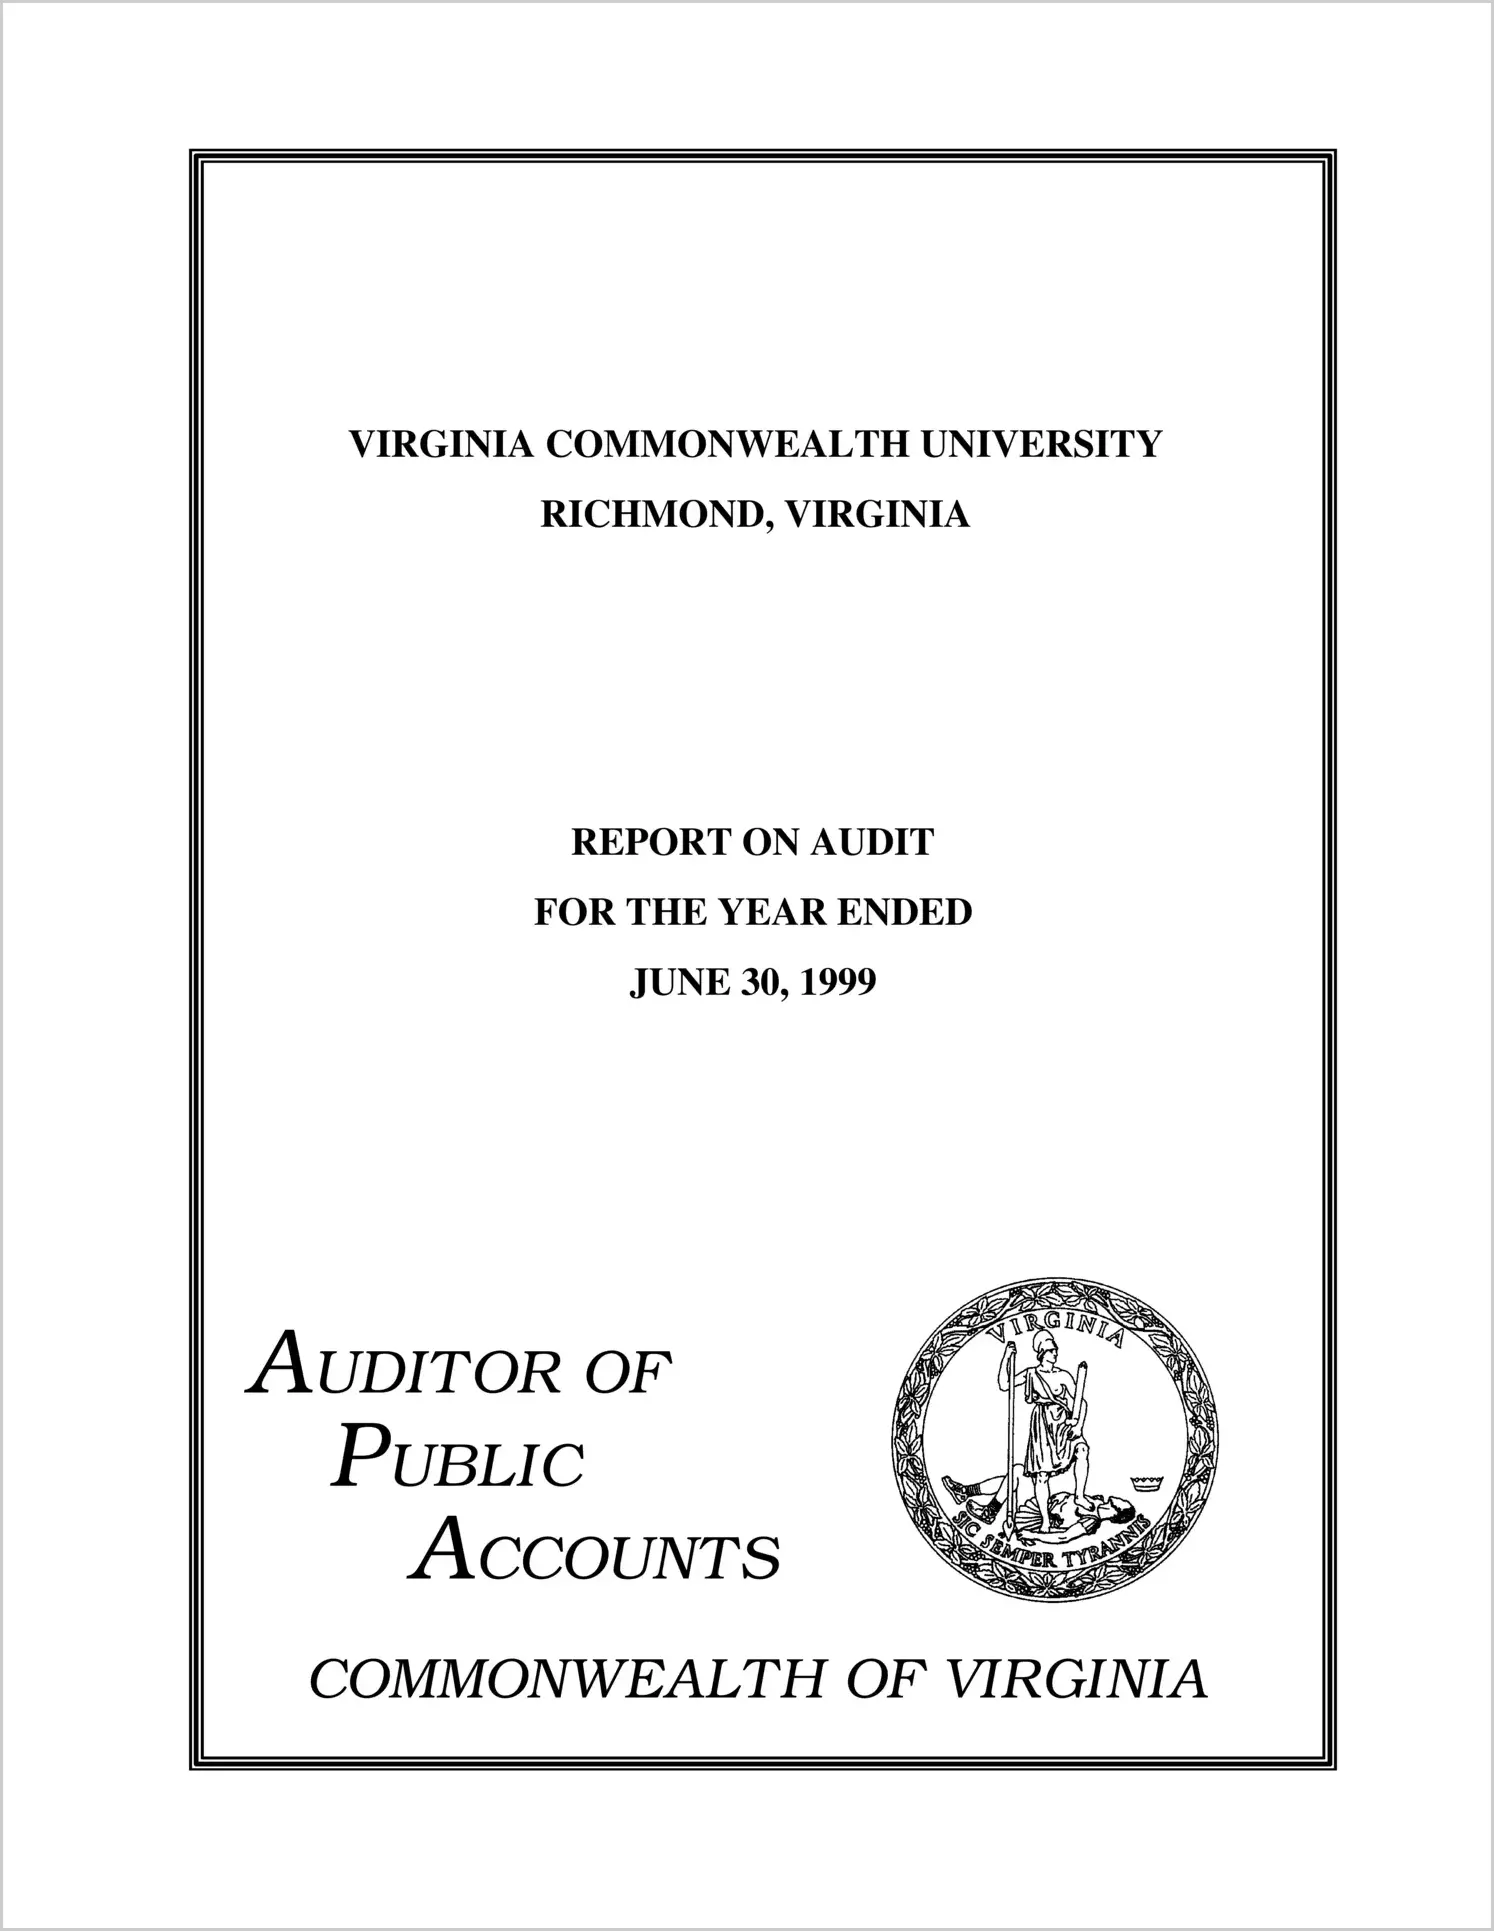 Virginia Commonwealth University for the year ended June 30, 1999